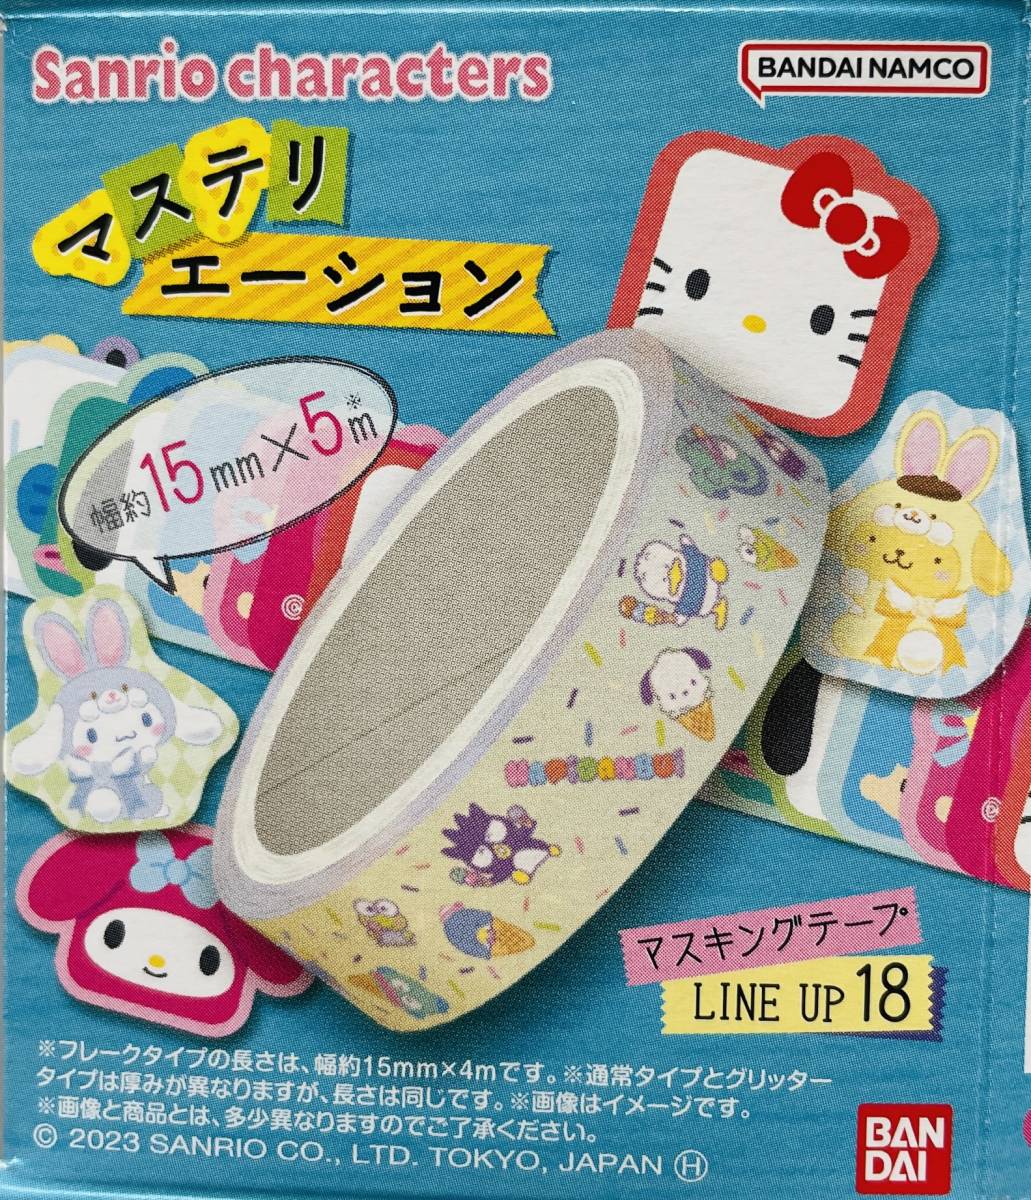  postage the cheapest 120 jpy ~*SANRIO CHARACTERS trout telie-shon Bad Badtz Maru * Sanrio character z masking tape trout te